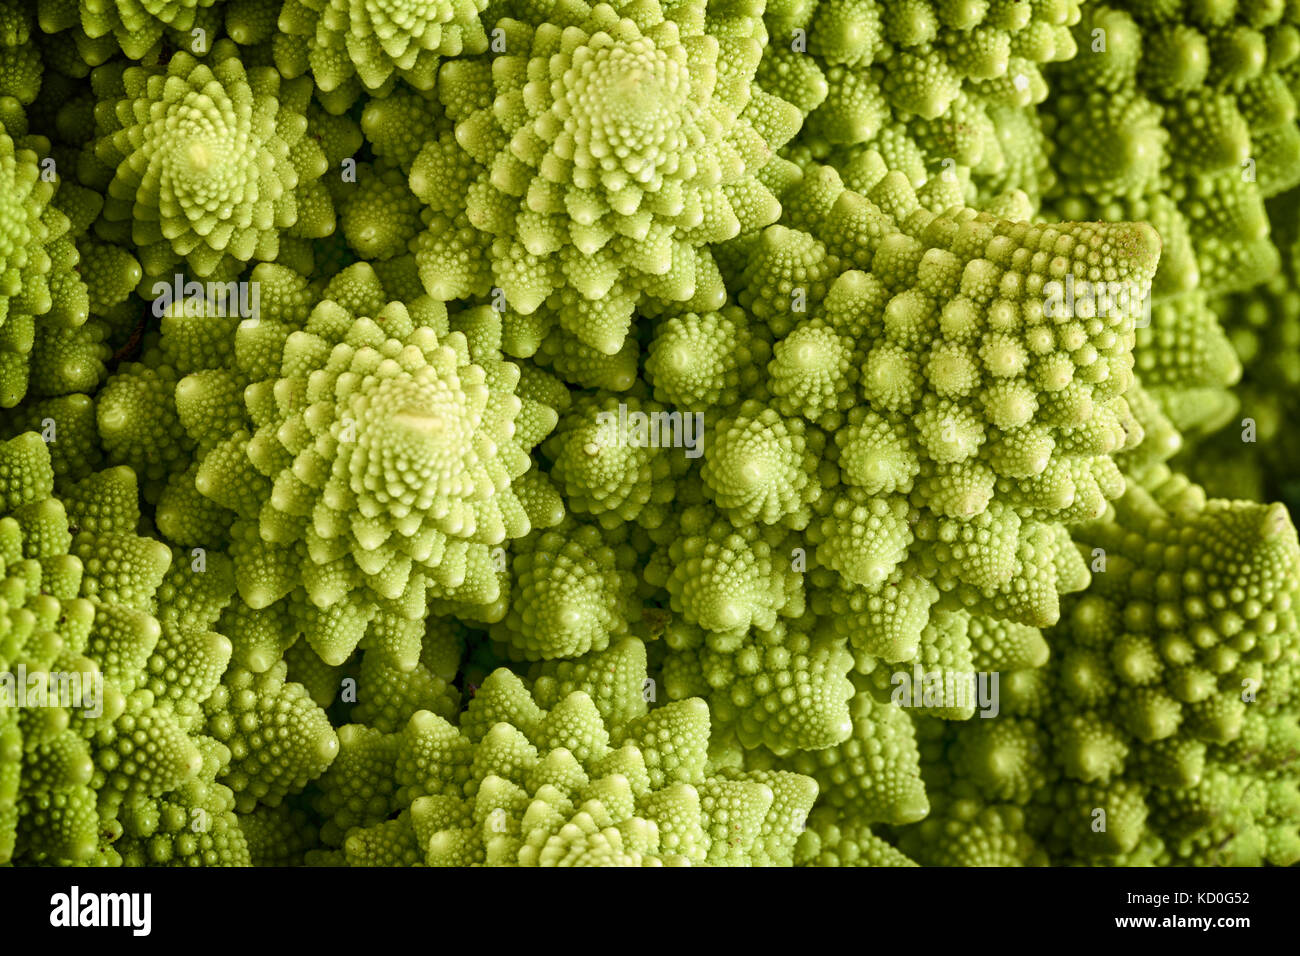 Romanesco broccoli vegetable represents a natural fractal pattern and is rich in vitimans. First documented in Italy originating from the Brassica ole Stock Photo